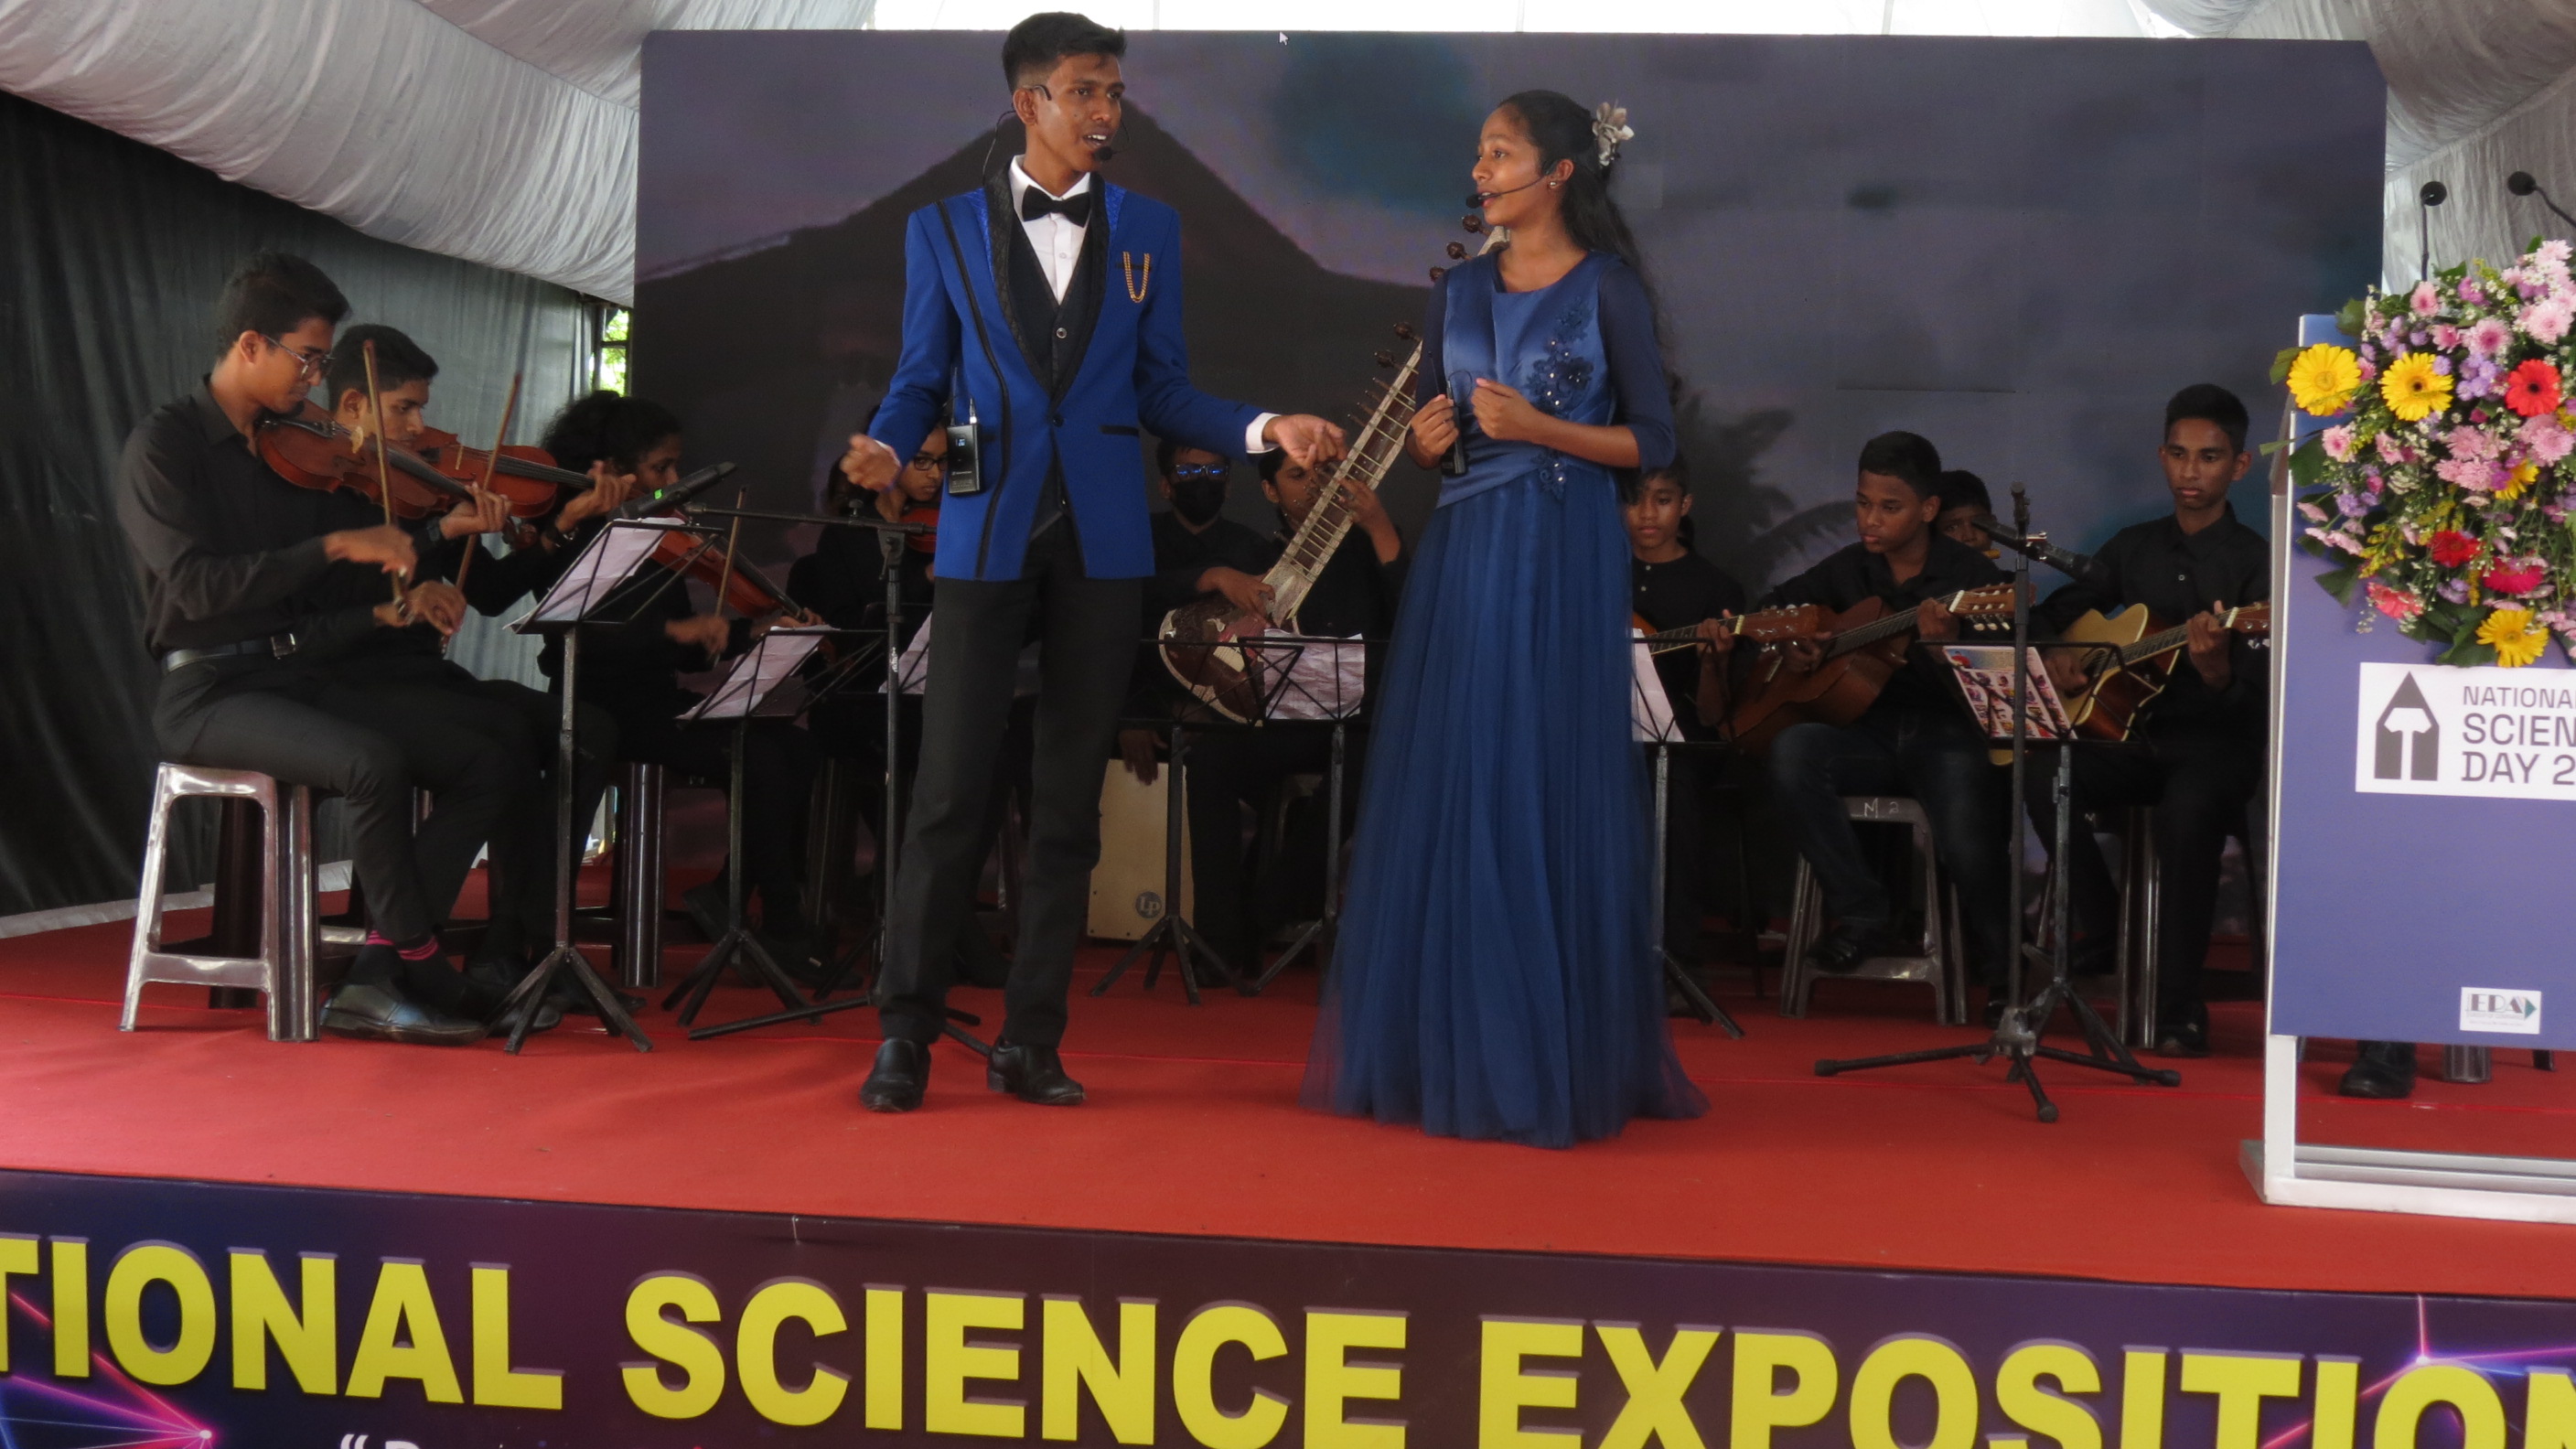 Student performance: Song Competition 